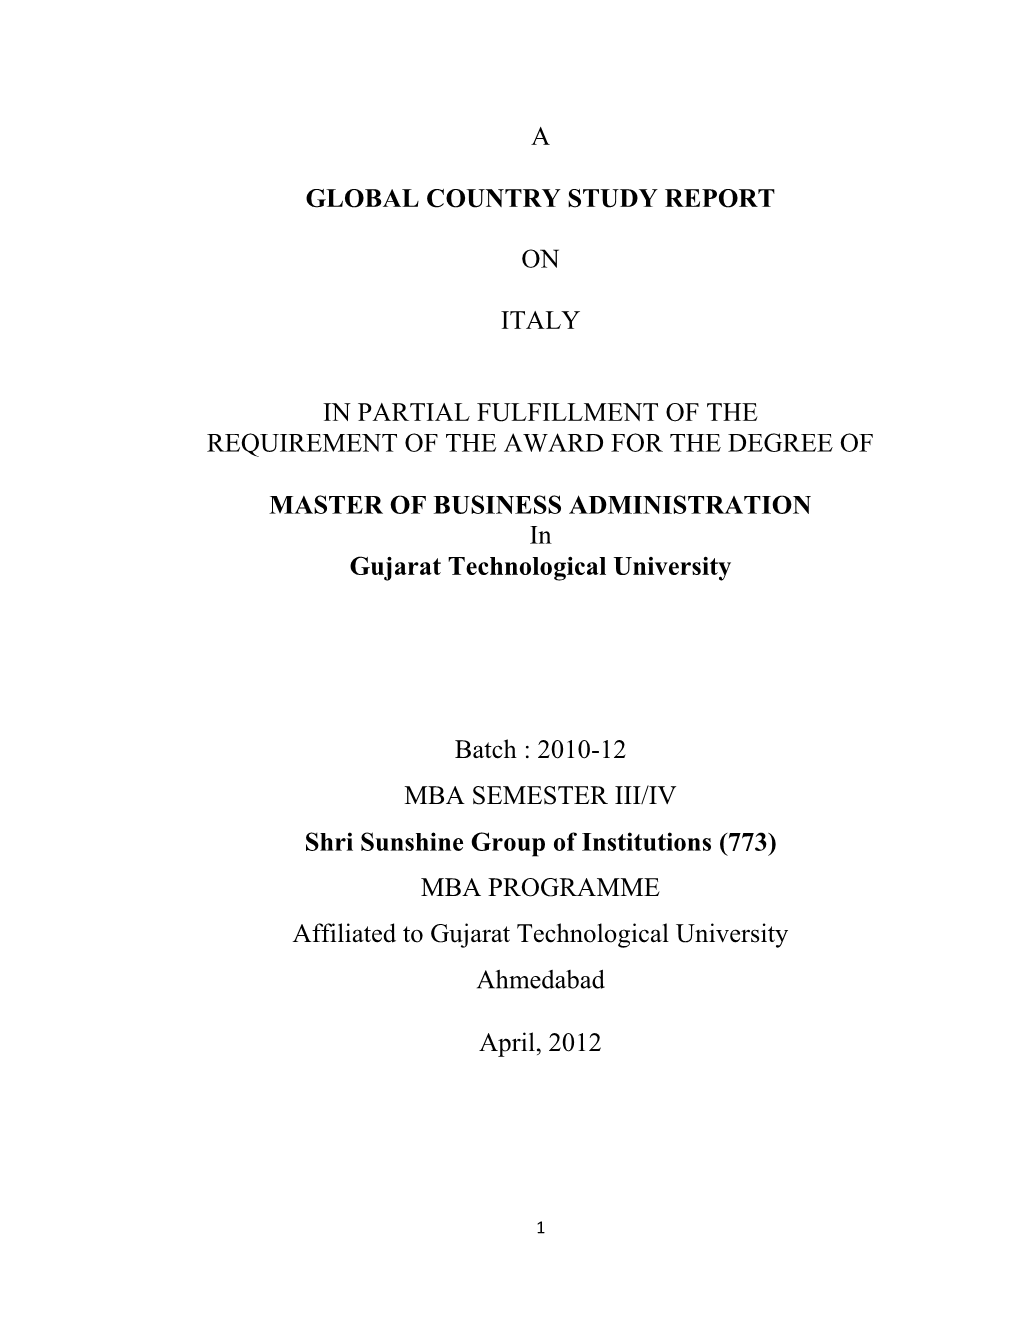 A Global Country Study Report on Italy in Partial